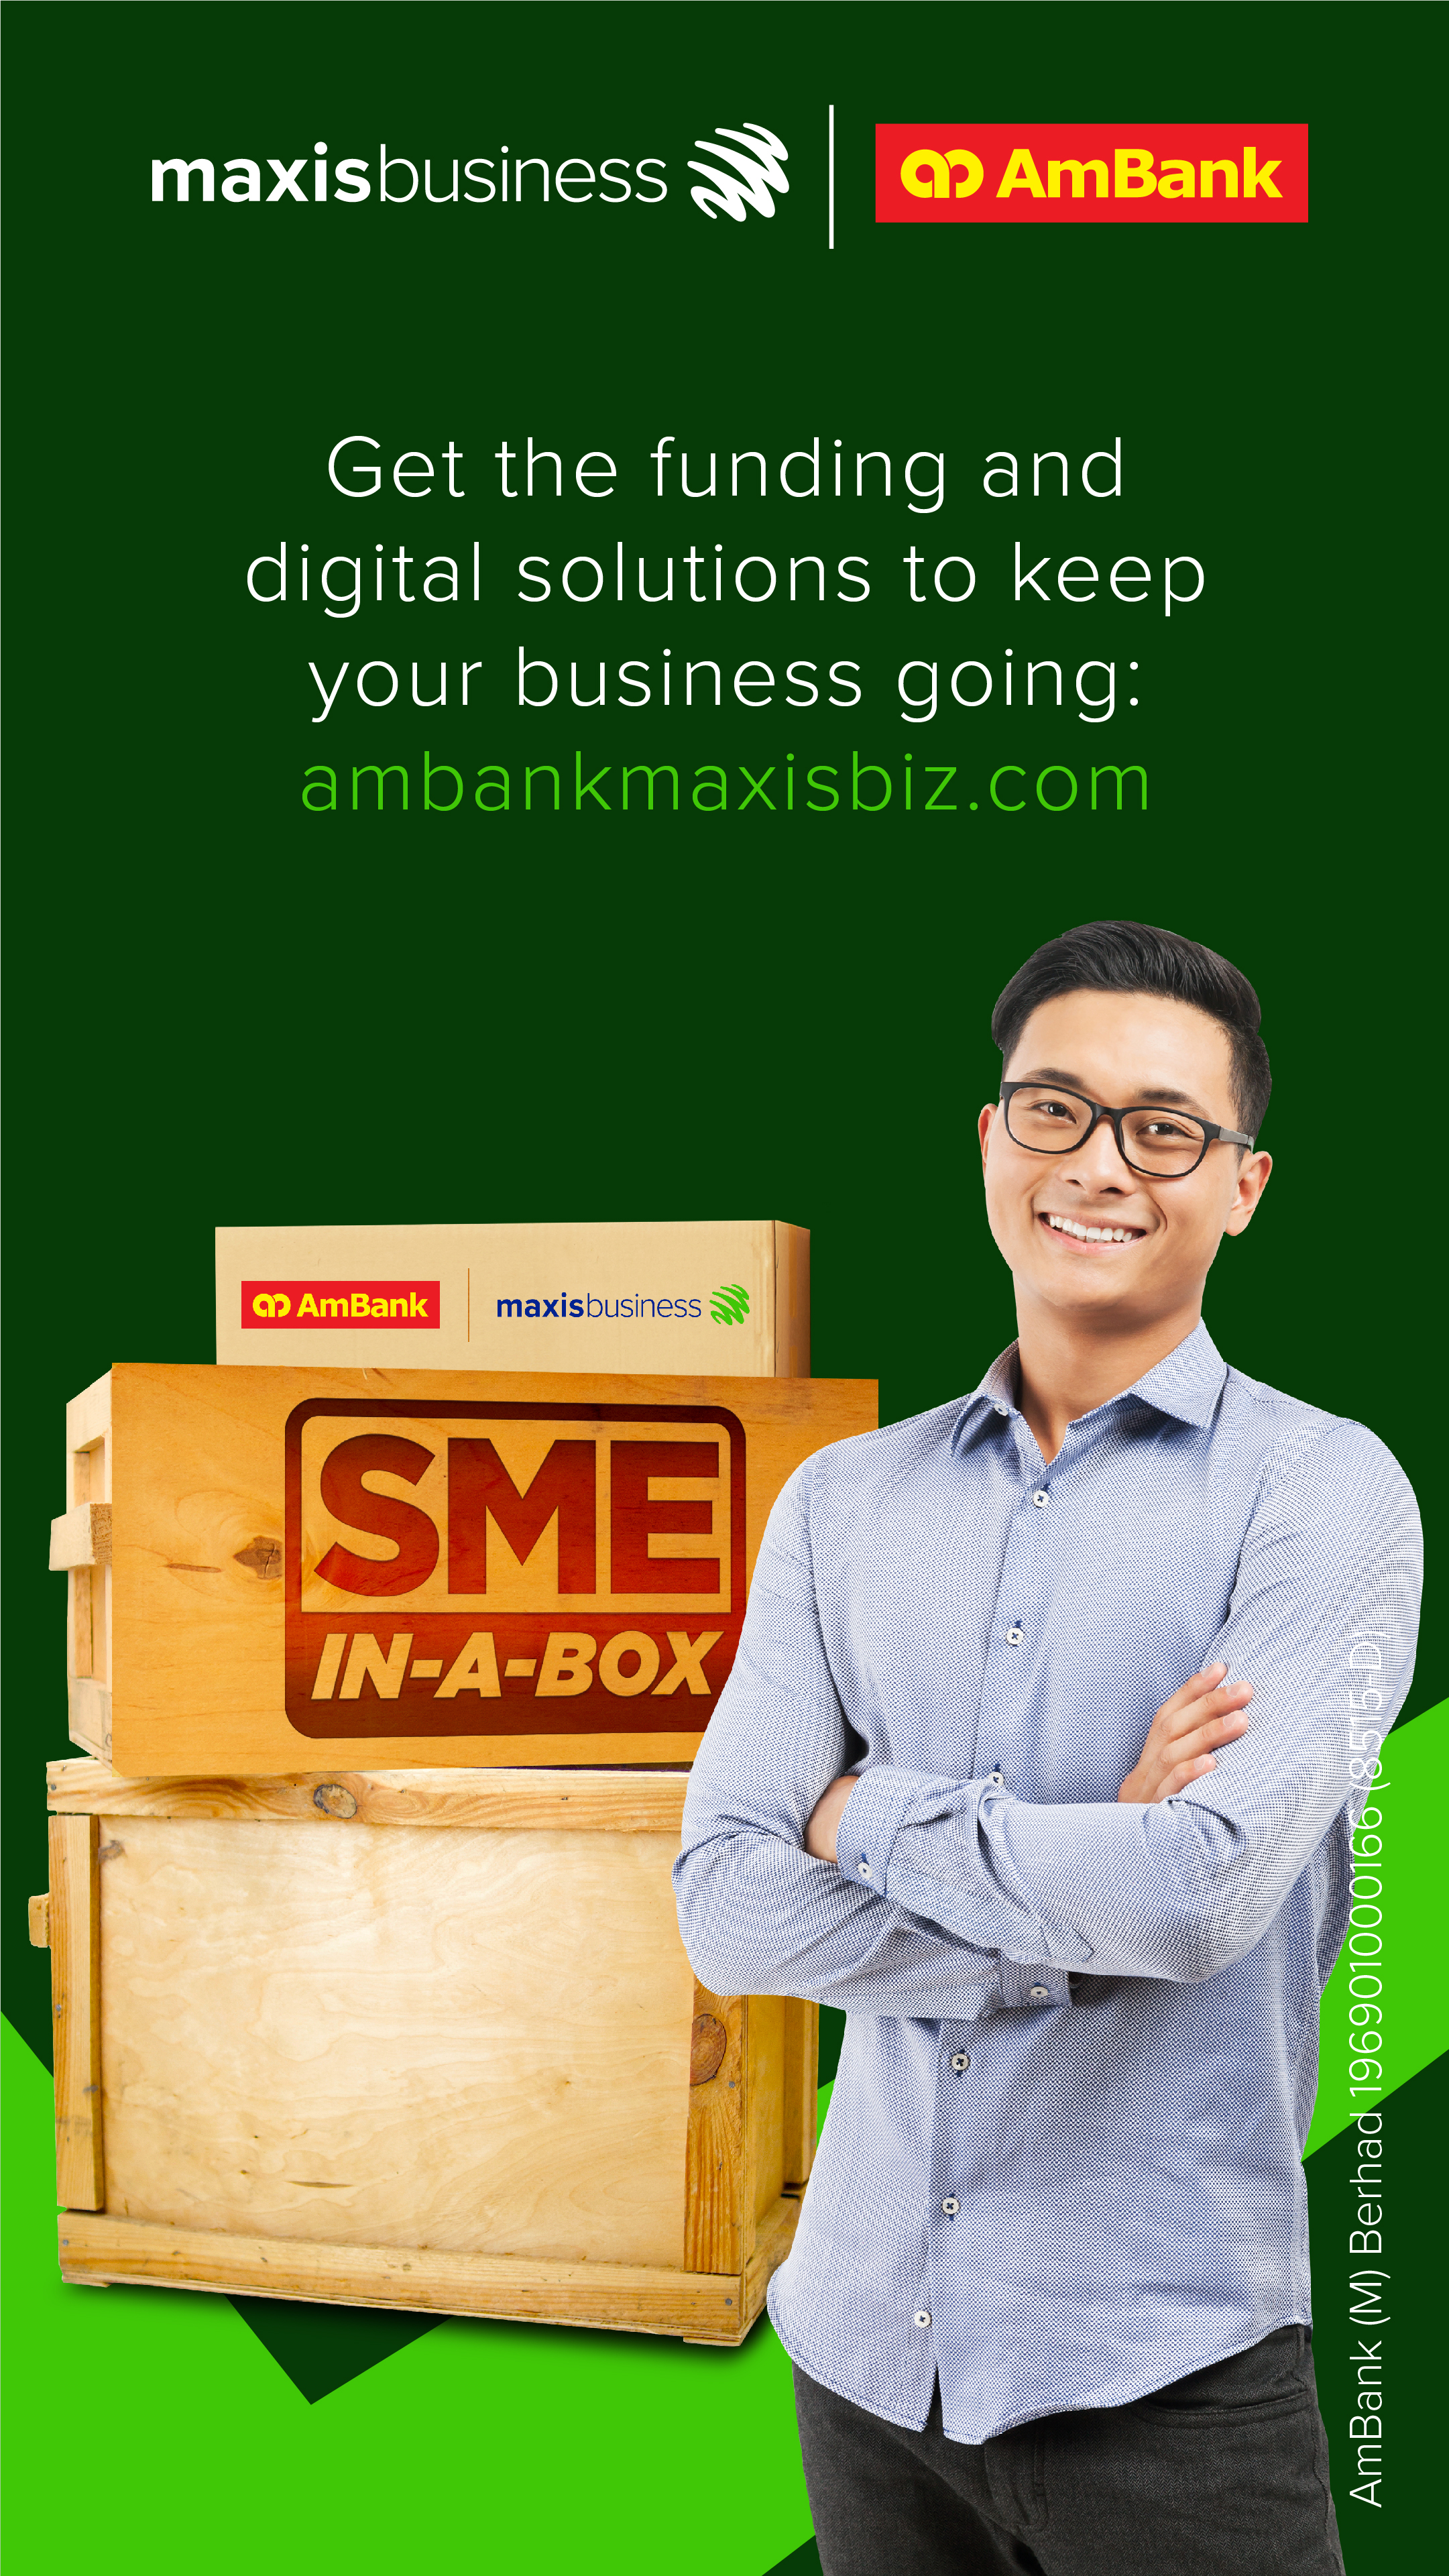 Get the funding and digital solutions to keep your business going ambankmaxisbiz.com